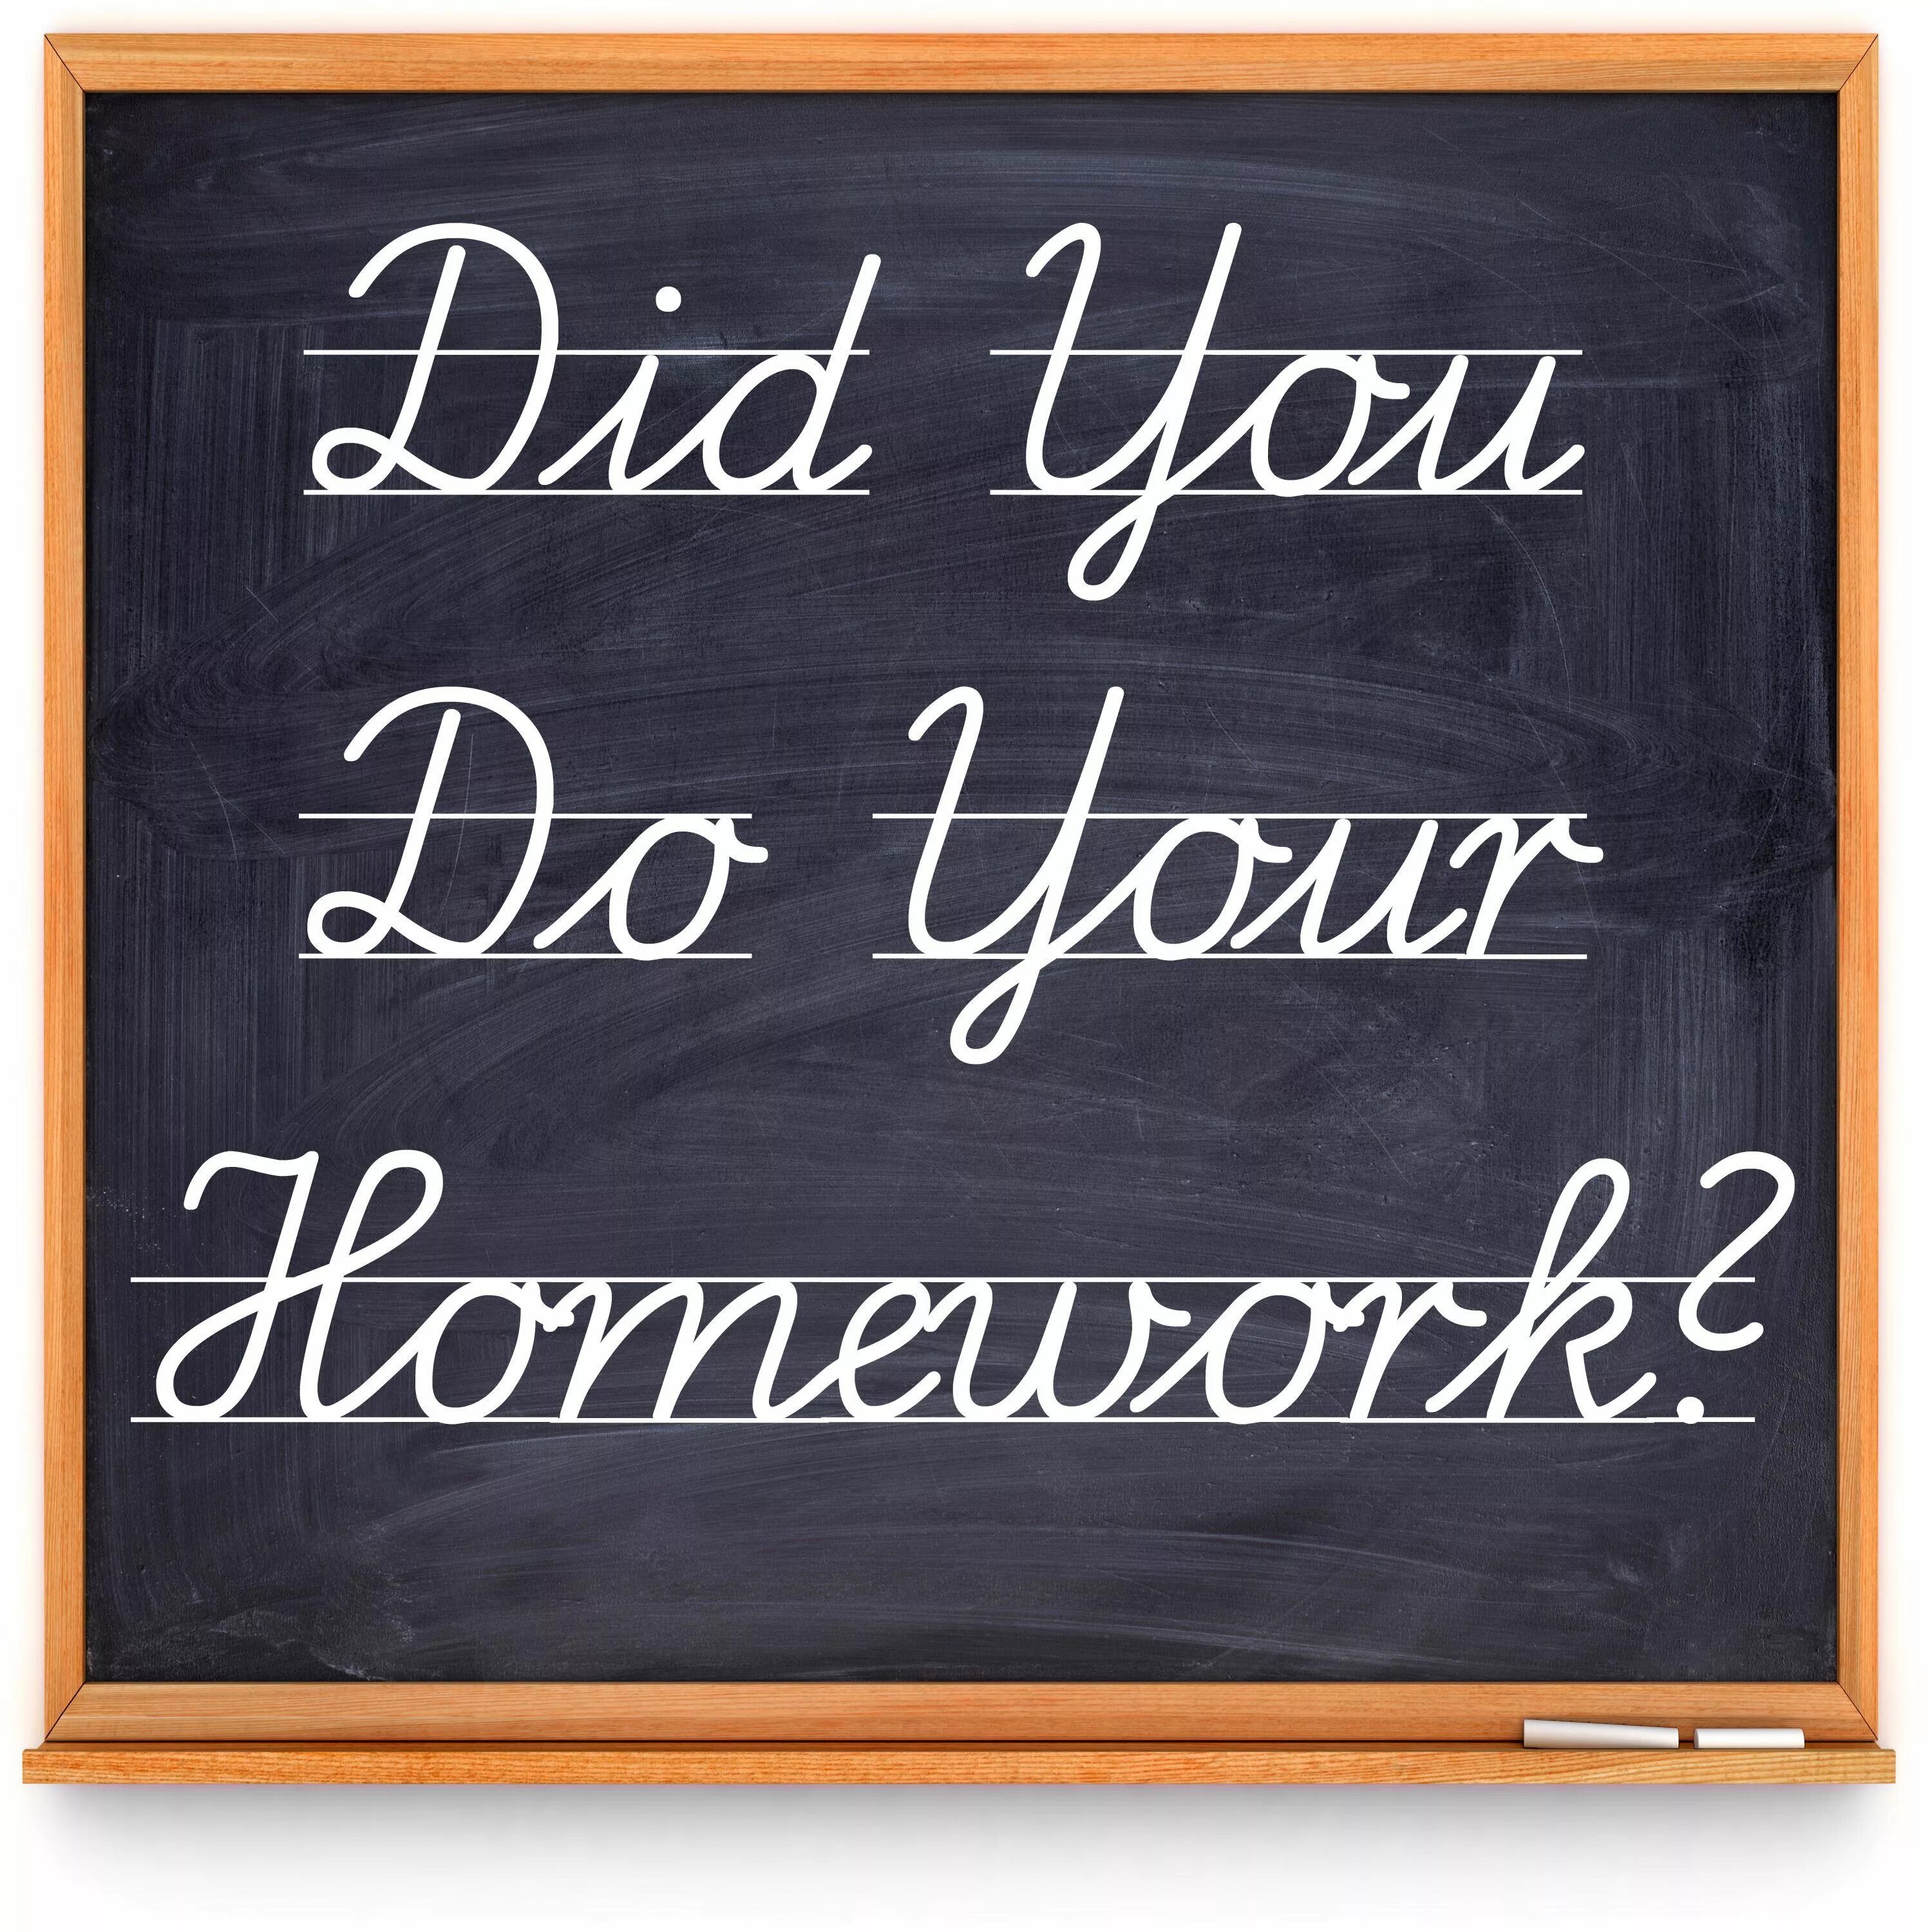 Did you do your homework. Your homework. ... Do your homework in English. Homework картинка. You doing your homework now